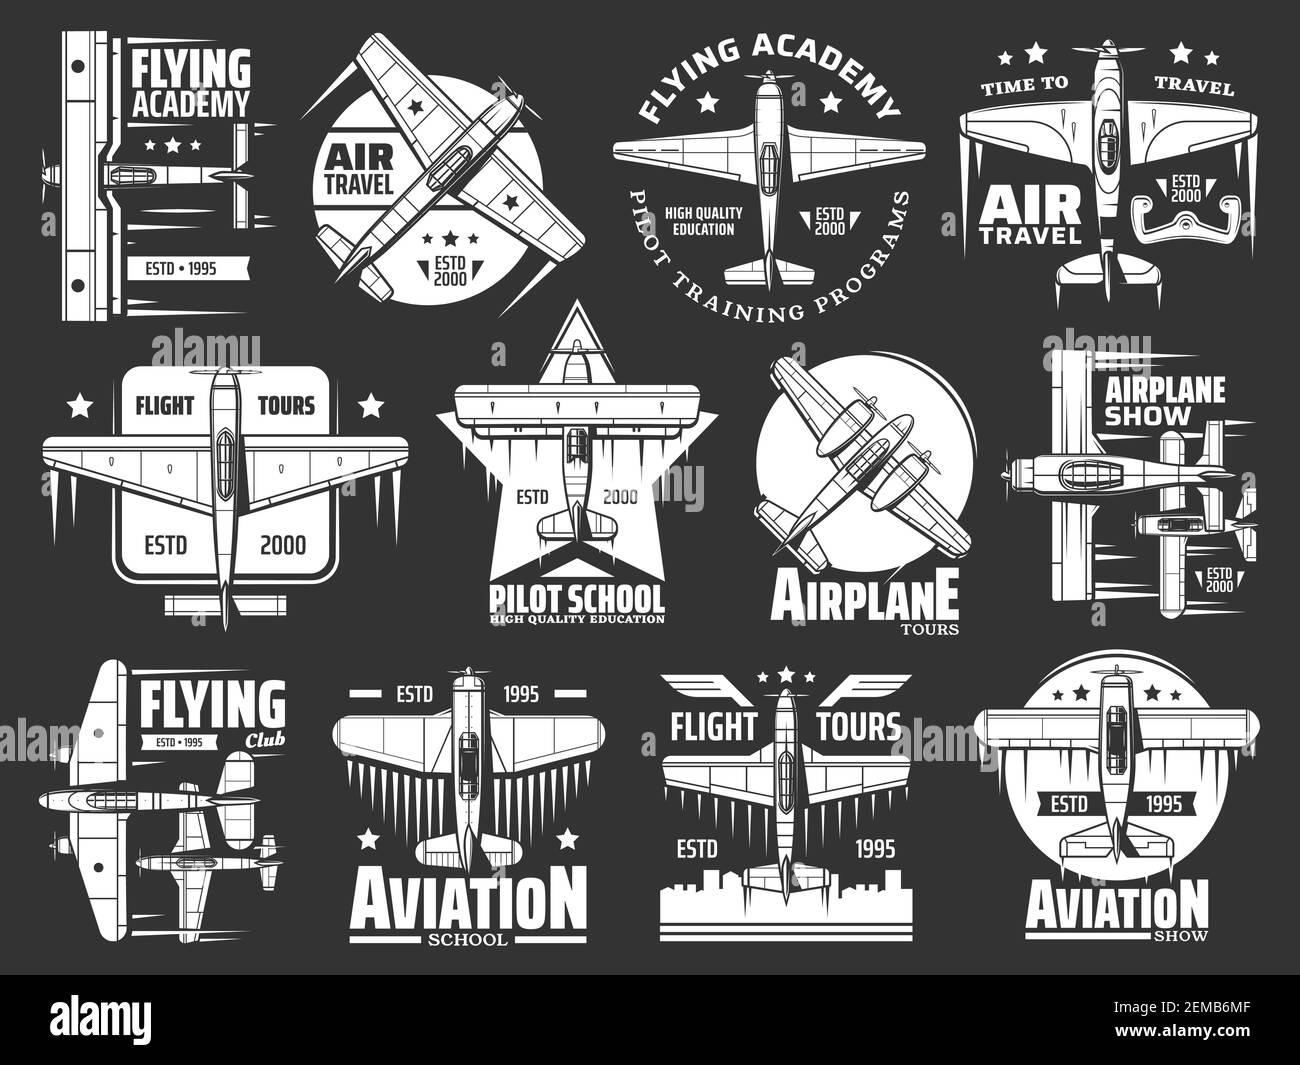 Aviation school and academy icons, aircraft and airplane, pilots and flight aviators vector retro badges. Air travel and flight training school, civil Stock Vector